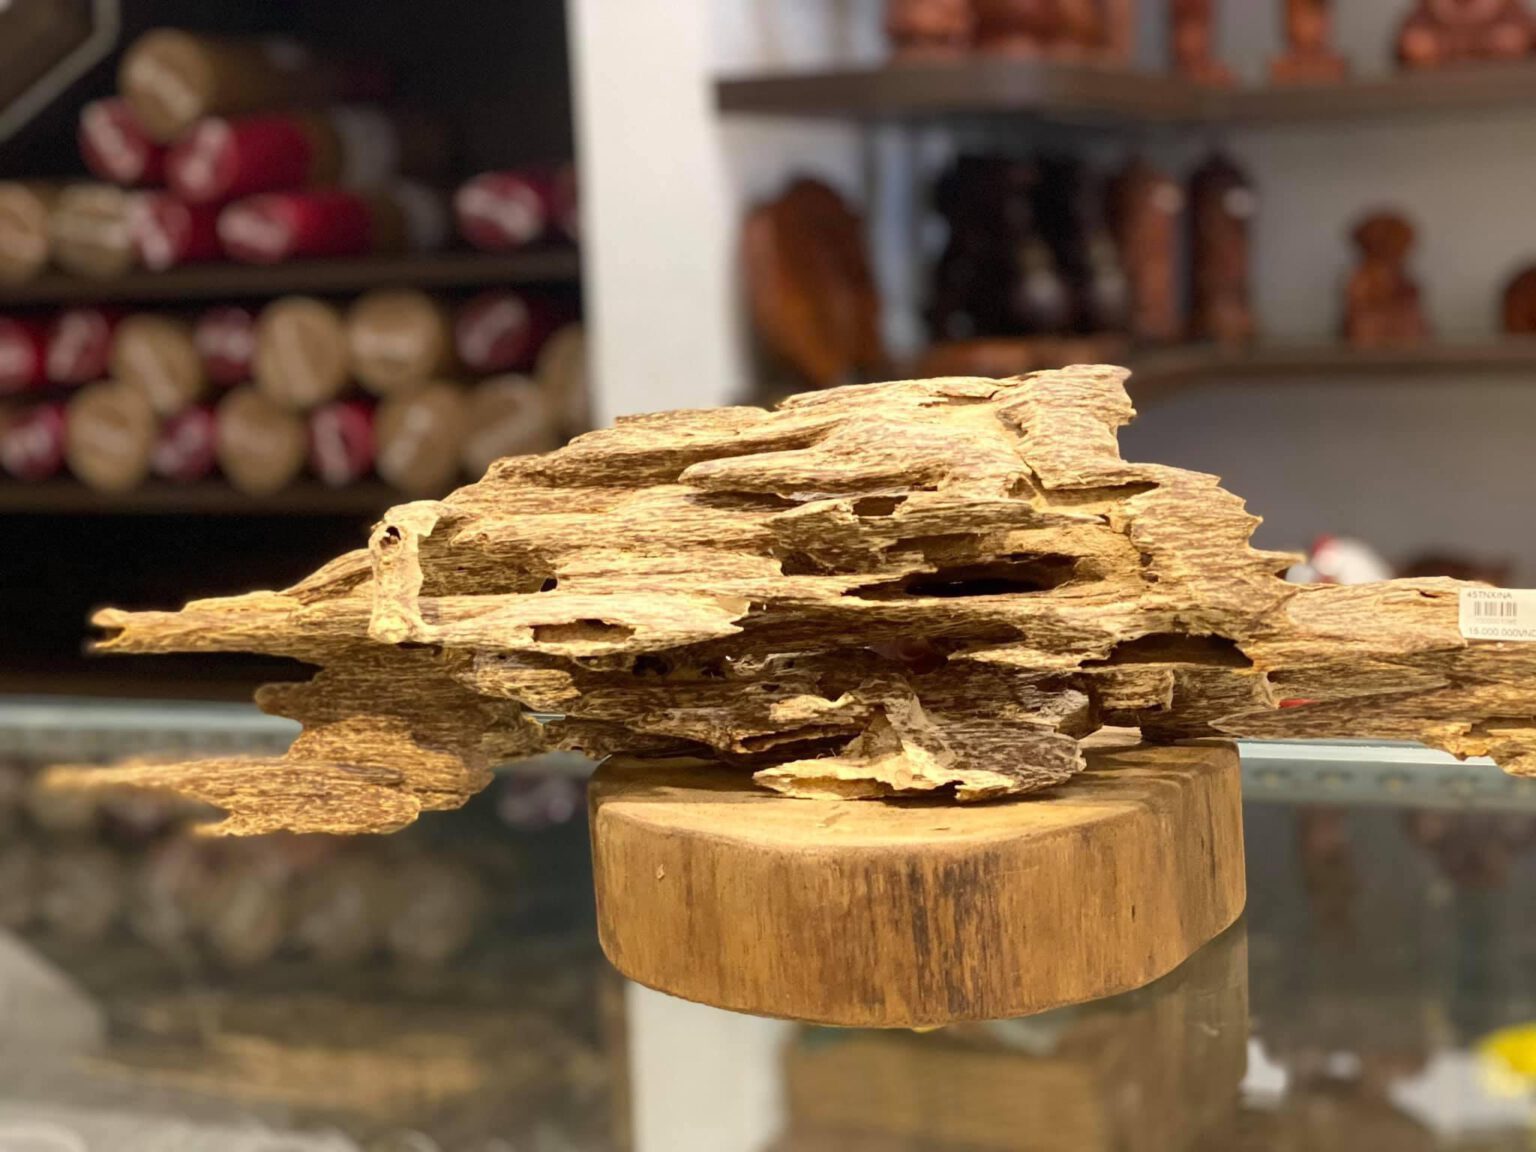 Agarwood is used to make feng shui products to stimulate positive energy